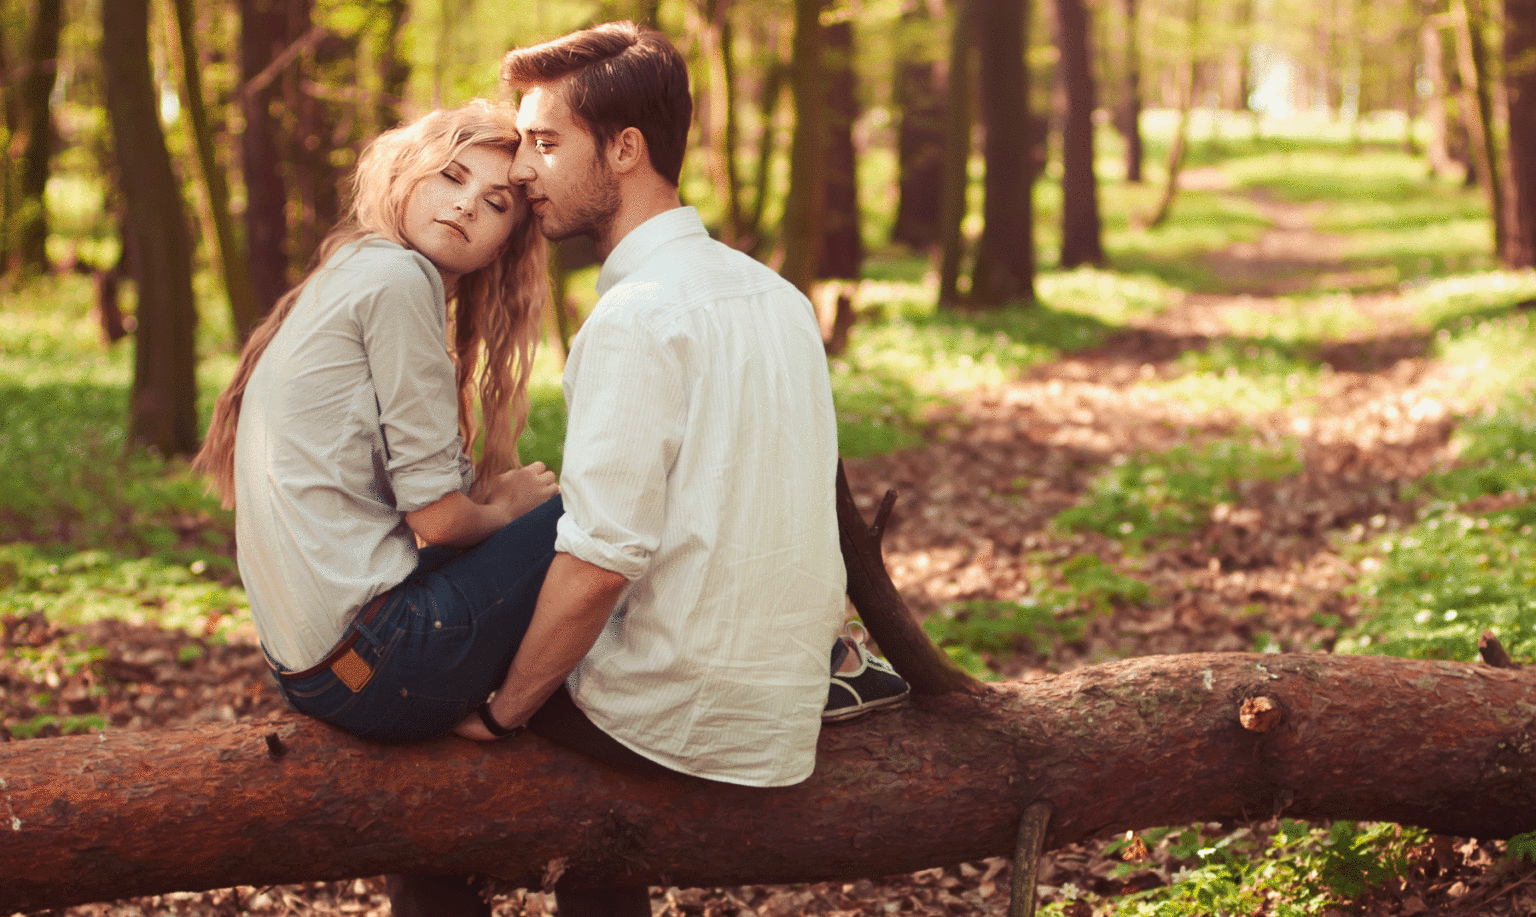 Sex Between Friends Can Strengthen Friendship Research Says Yes ⋆ The Costa Rica News 2497